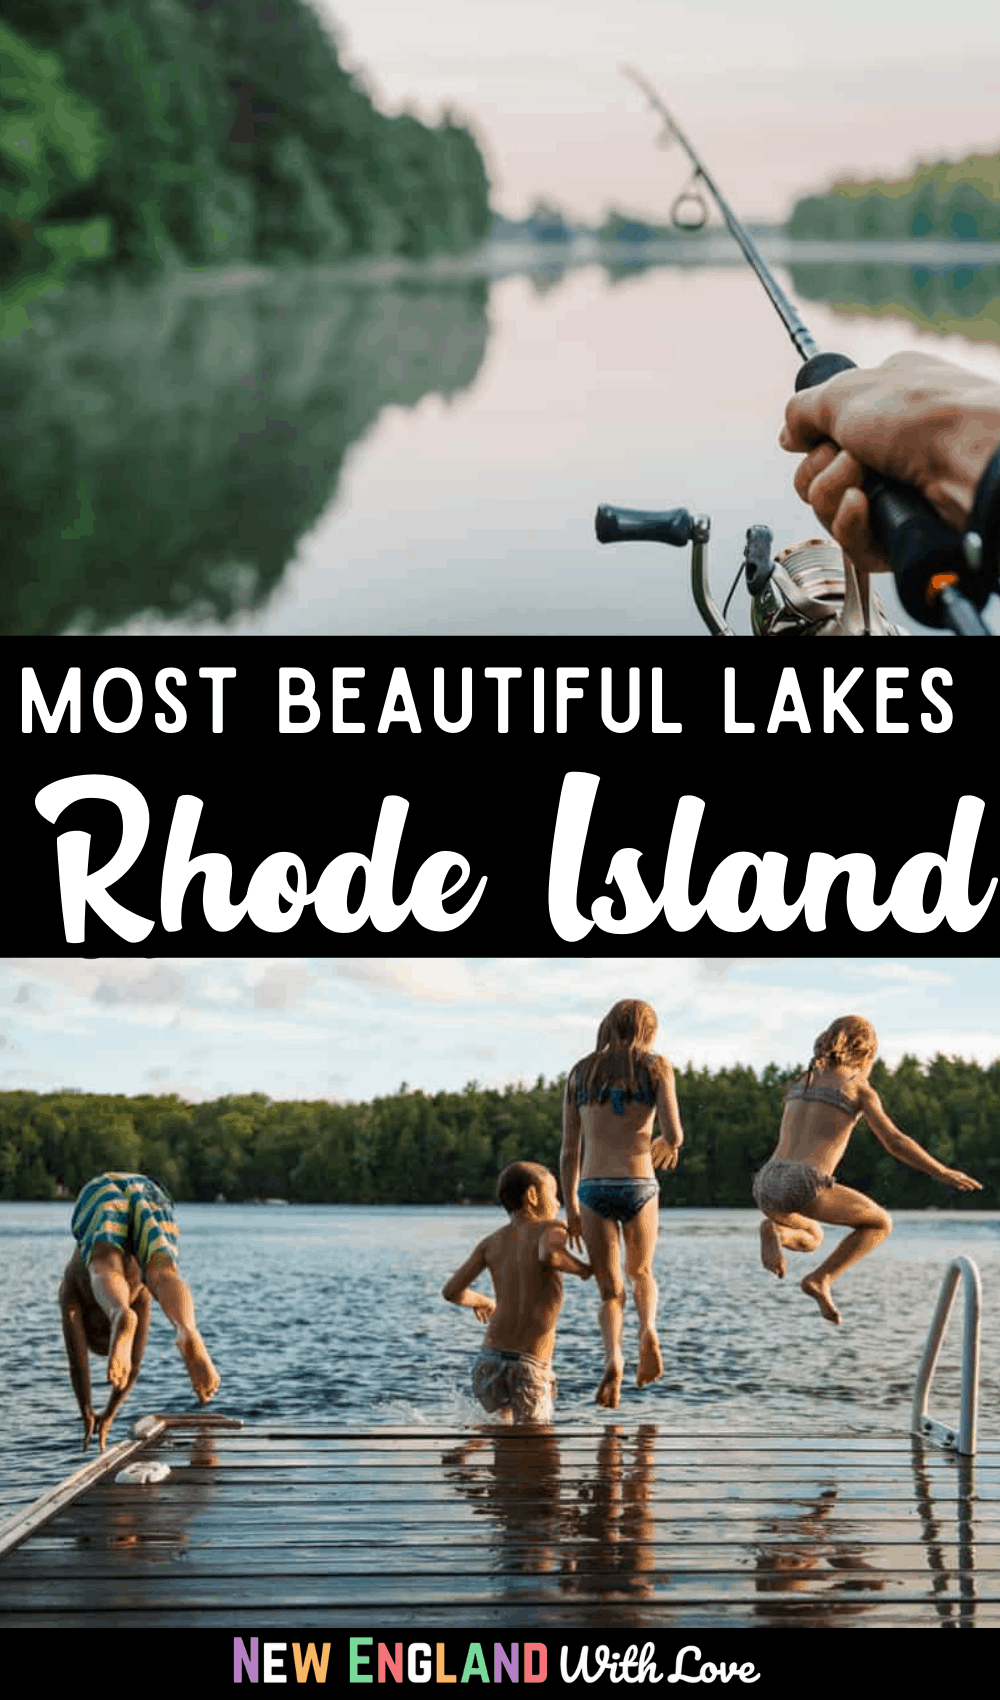 Pinterest graphic reading "Most Beautiful Lakes Rhode Island"